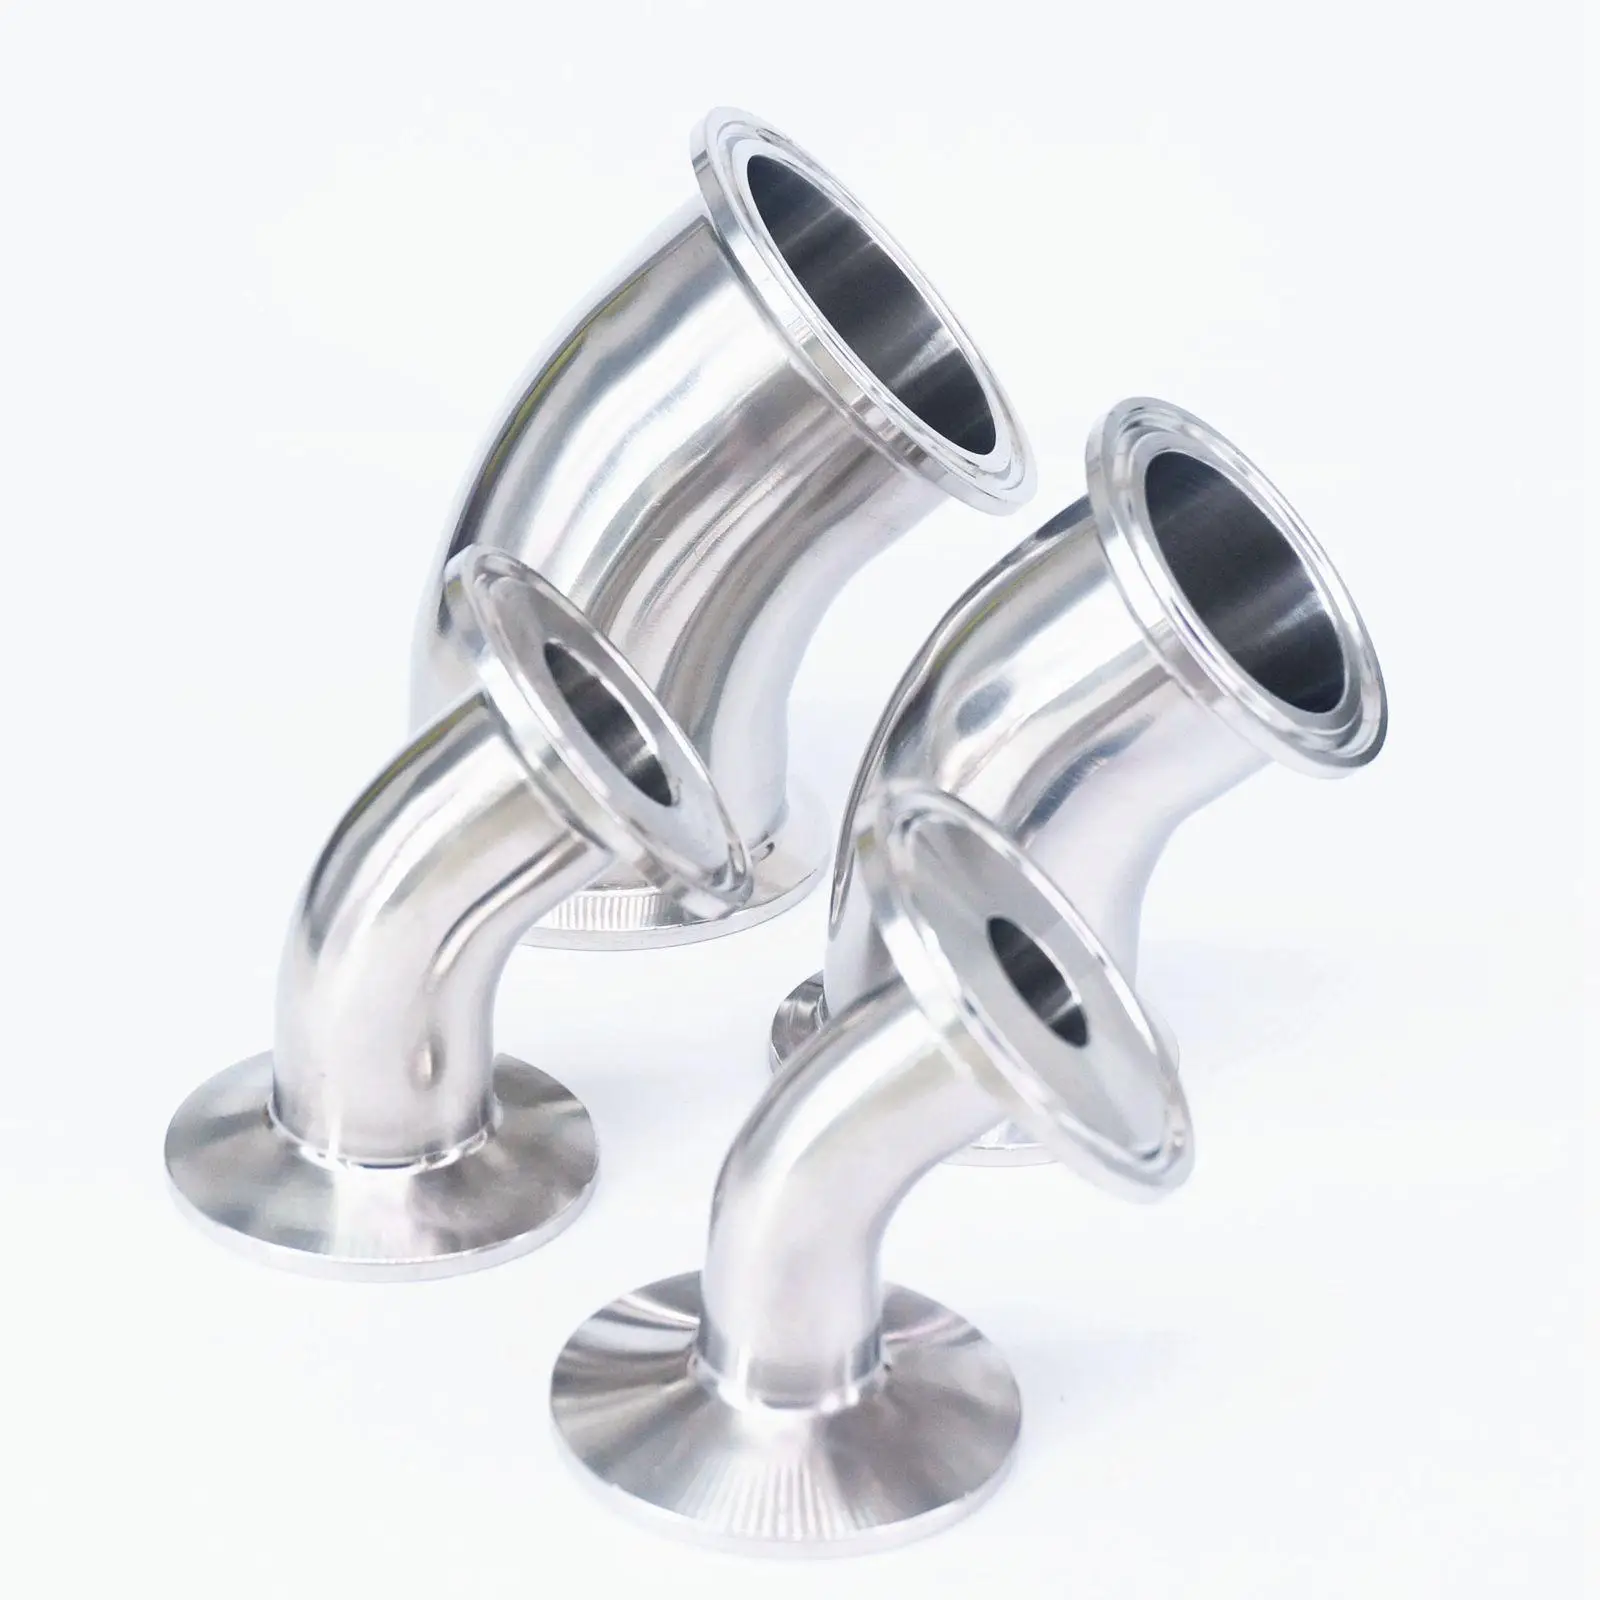 

1.5" 2" 2.5" 3" 3.5" 4" Tri Clamp Ferrule 304 Stainless Steel 45 Degree Elbow Sanitary Pipe Fitting Home Brew